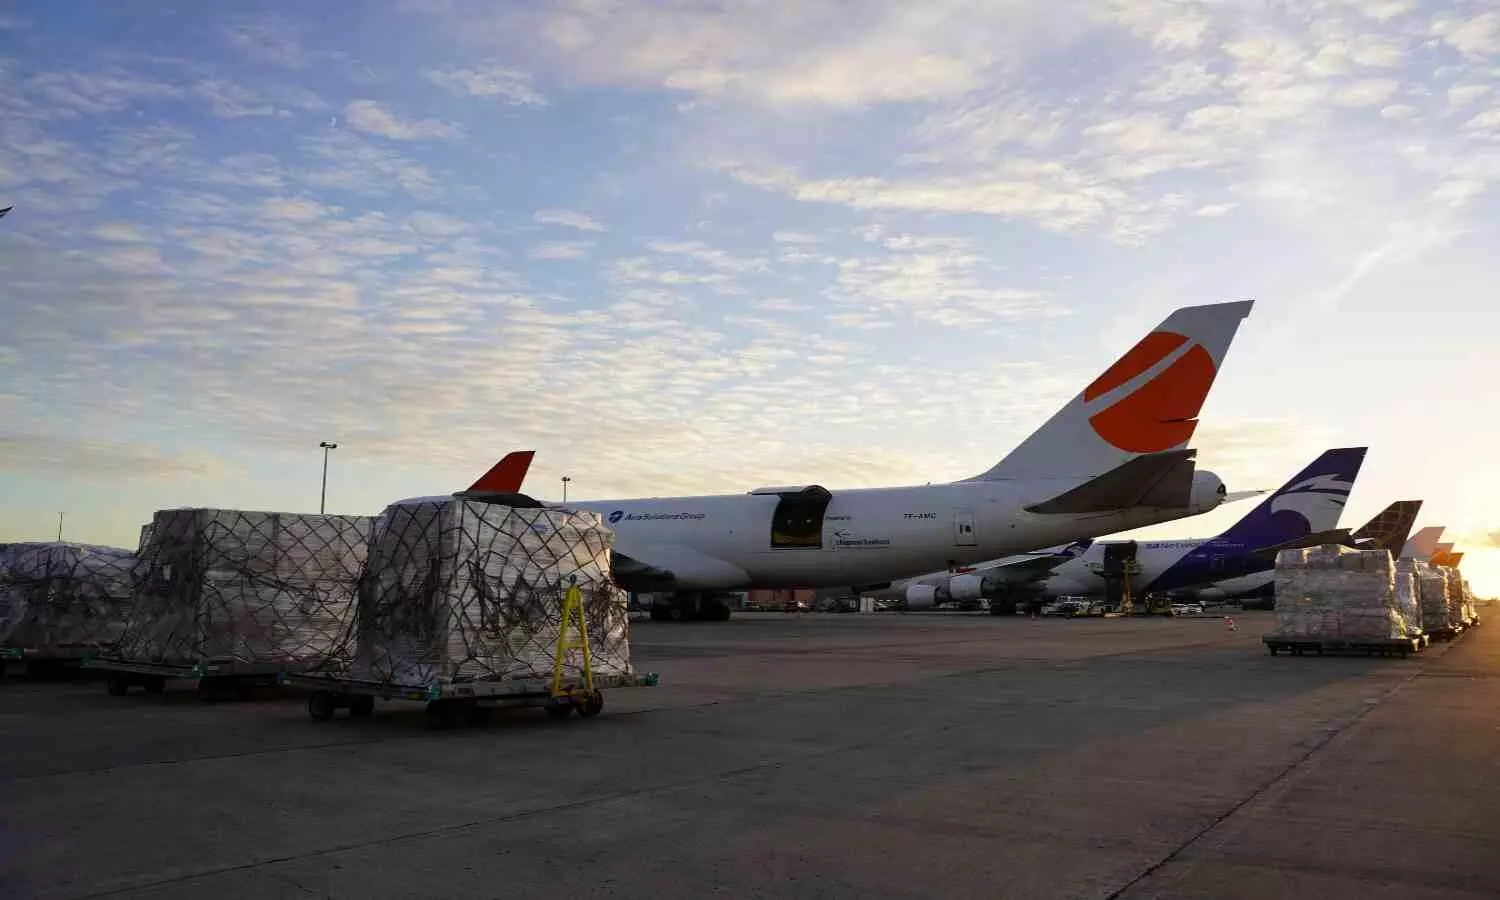 Liege Airport handled 1.1 million tonnes of cargo in 2022 as against 1.4 million in 2021